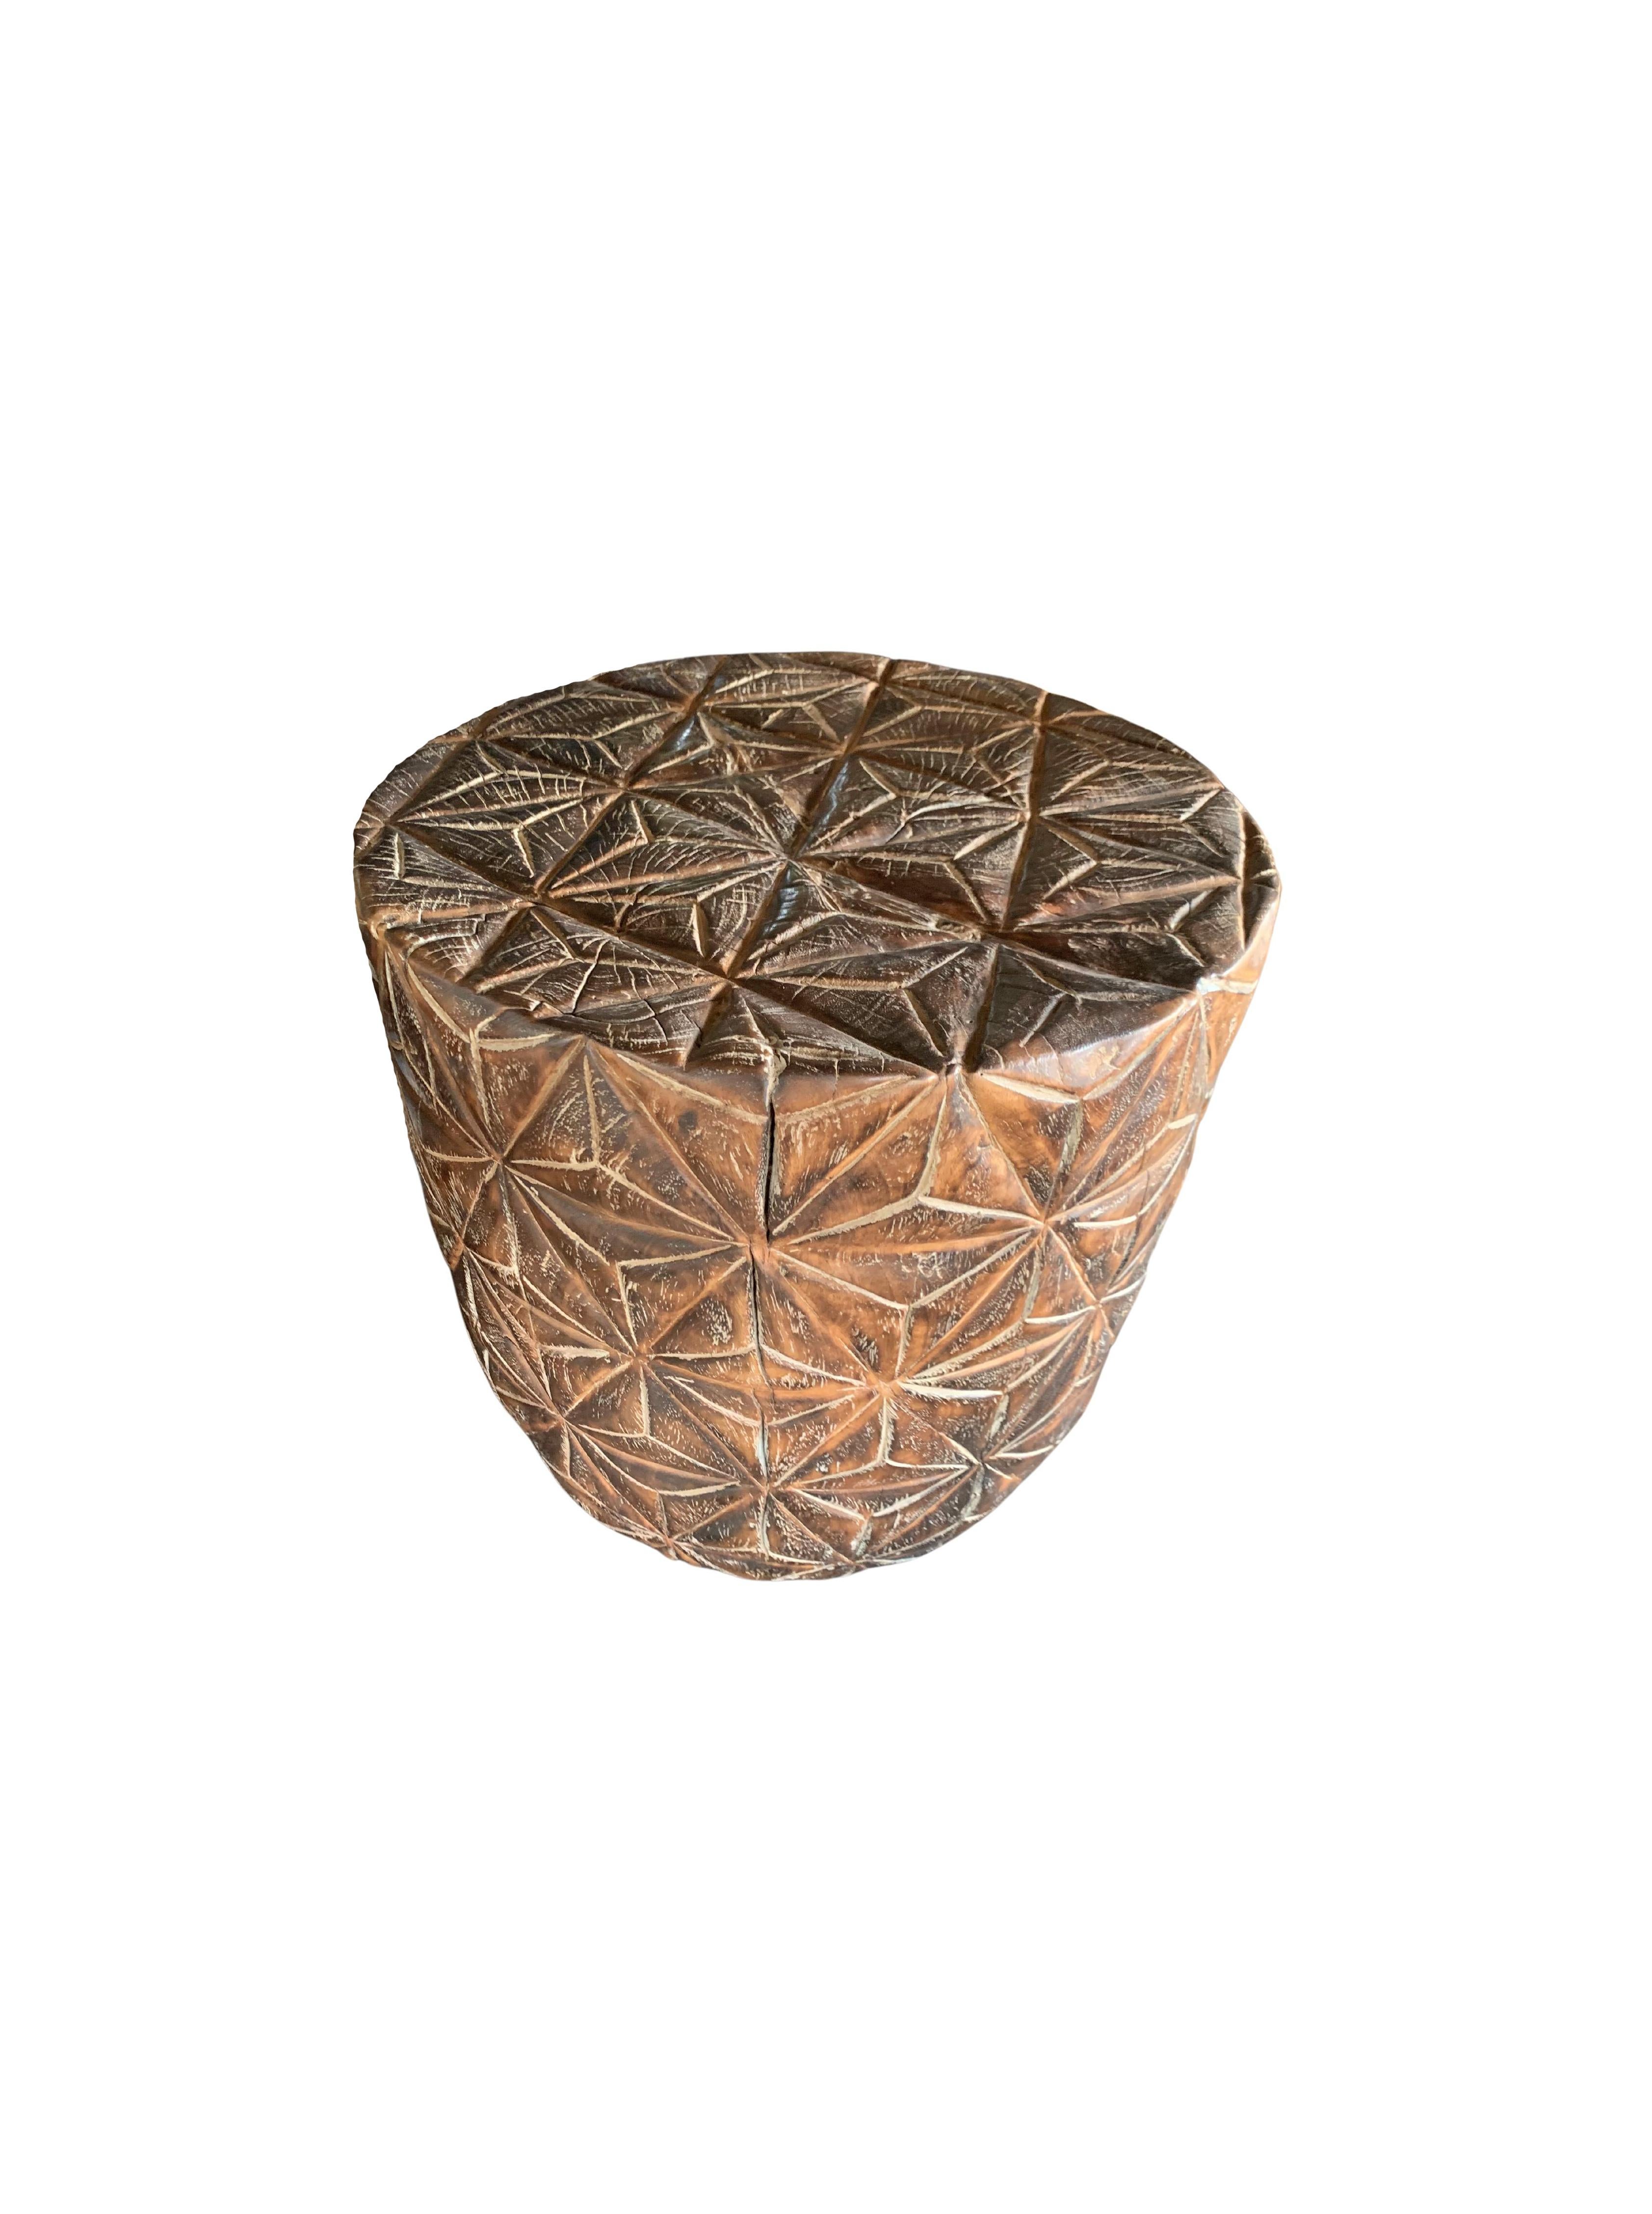 A wonderfully sculptural side table with a geometric pattern hand-carved on all sides. Its neutral pigment and subtle wood texture makes it perfect for any space. A uniquely sculptural and versatile piece certain to invoke conversation. This table